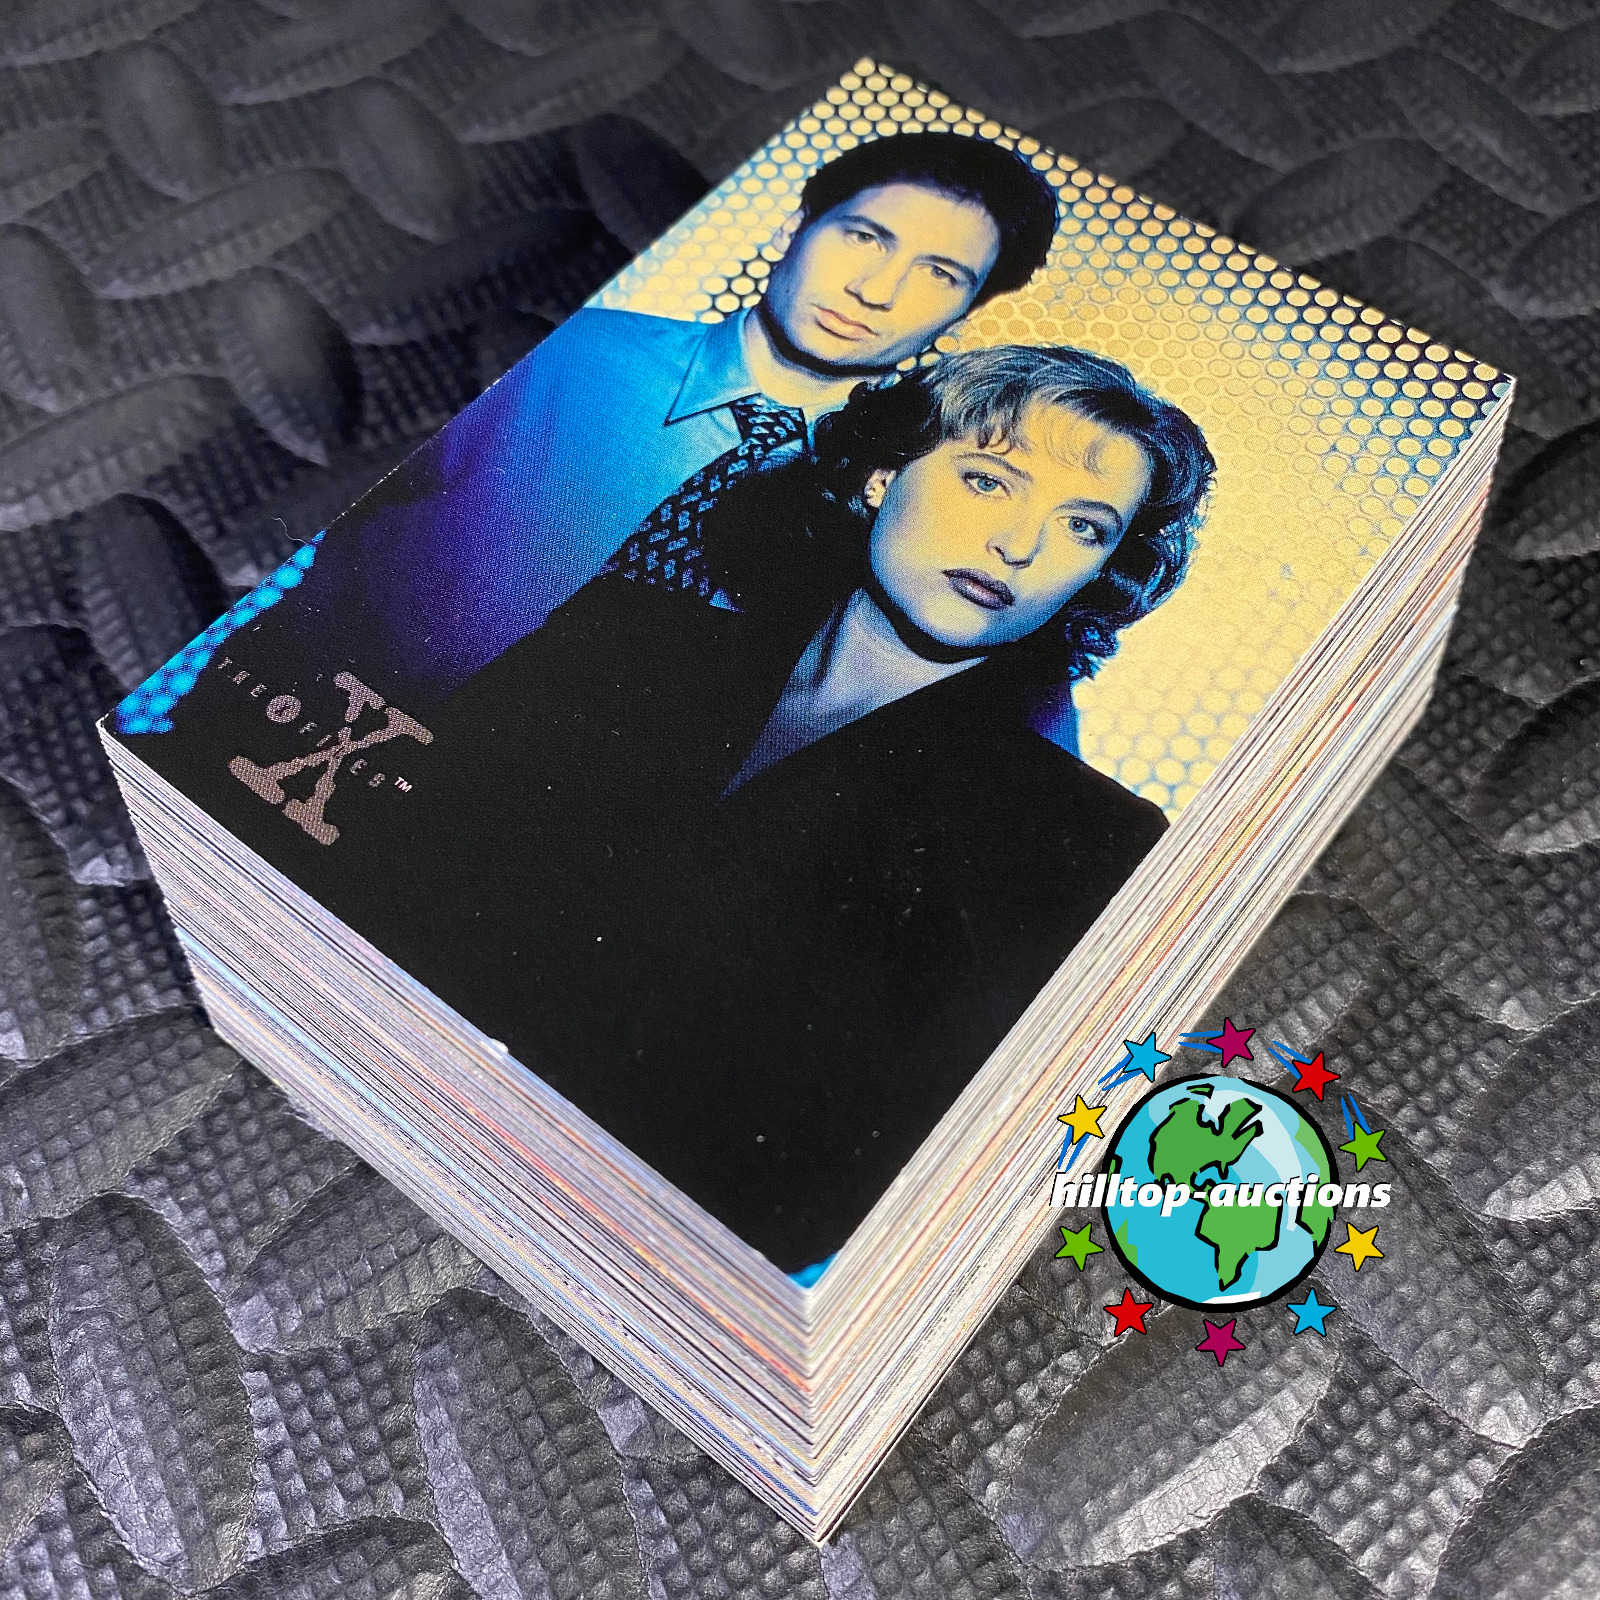 THE X-FILES SEASON 1 COMPLETE 72-CARD TV SHOW TRADING CARDS SET 1995 TOPPS